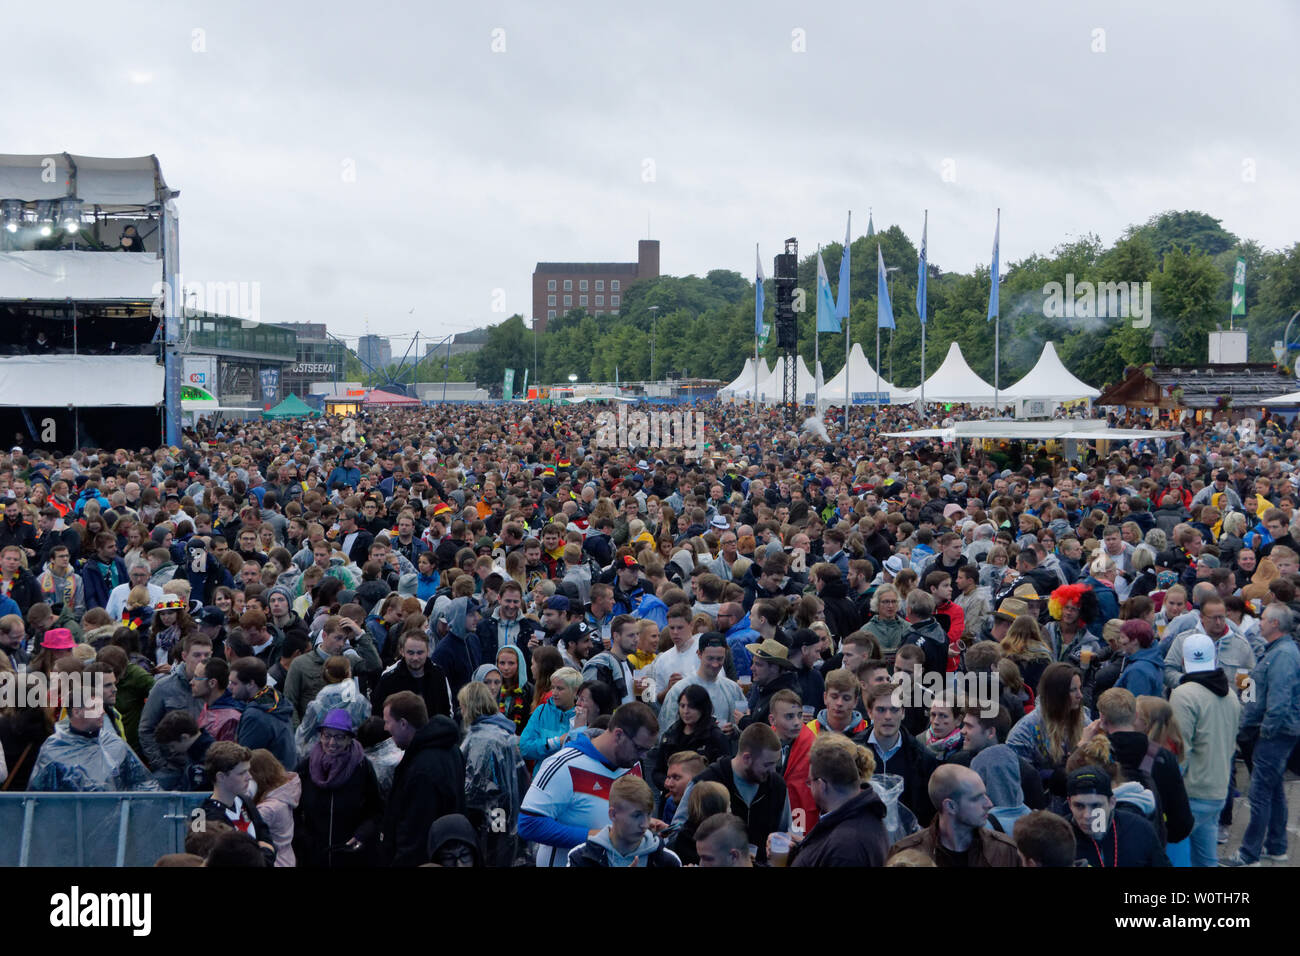 Kiel, Germany - June 23, 2018:  Public Viewing of the Football Game Germany vs. Sweden in Front of the NDR Stage during Kieler Woche 2018 Stock Photo